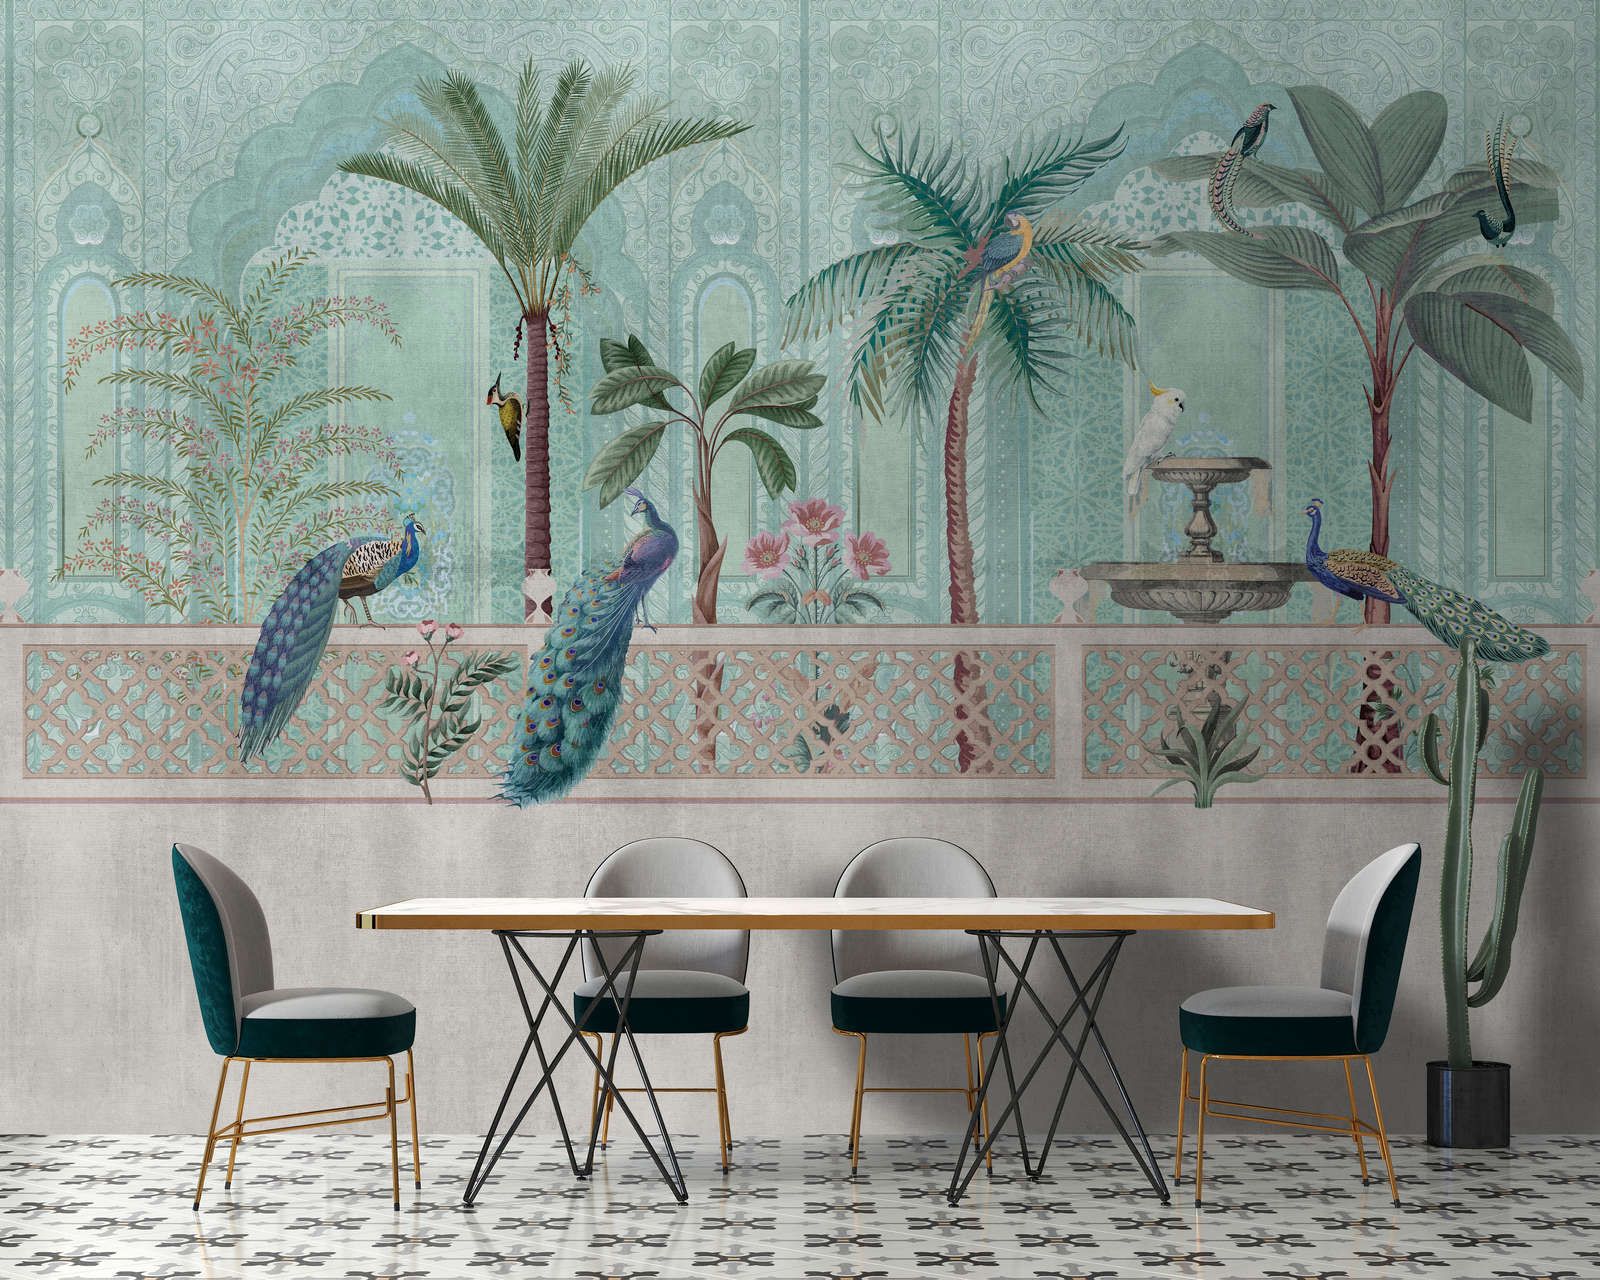             Photo wallpaper »pavo« - Birds, palm trees & fountains - Green, blue with tapestry structure | Lightly textured non-woven
        